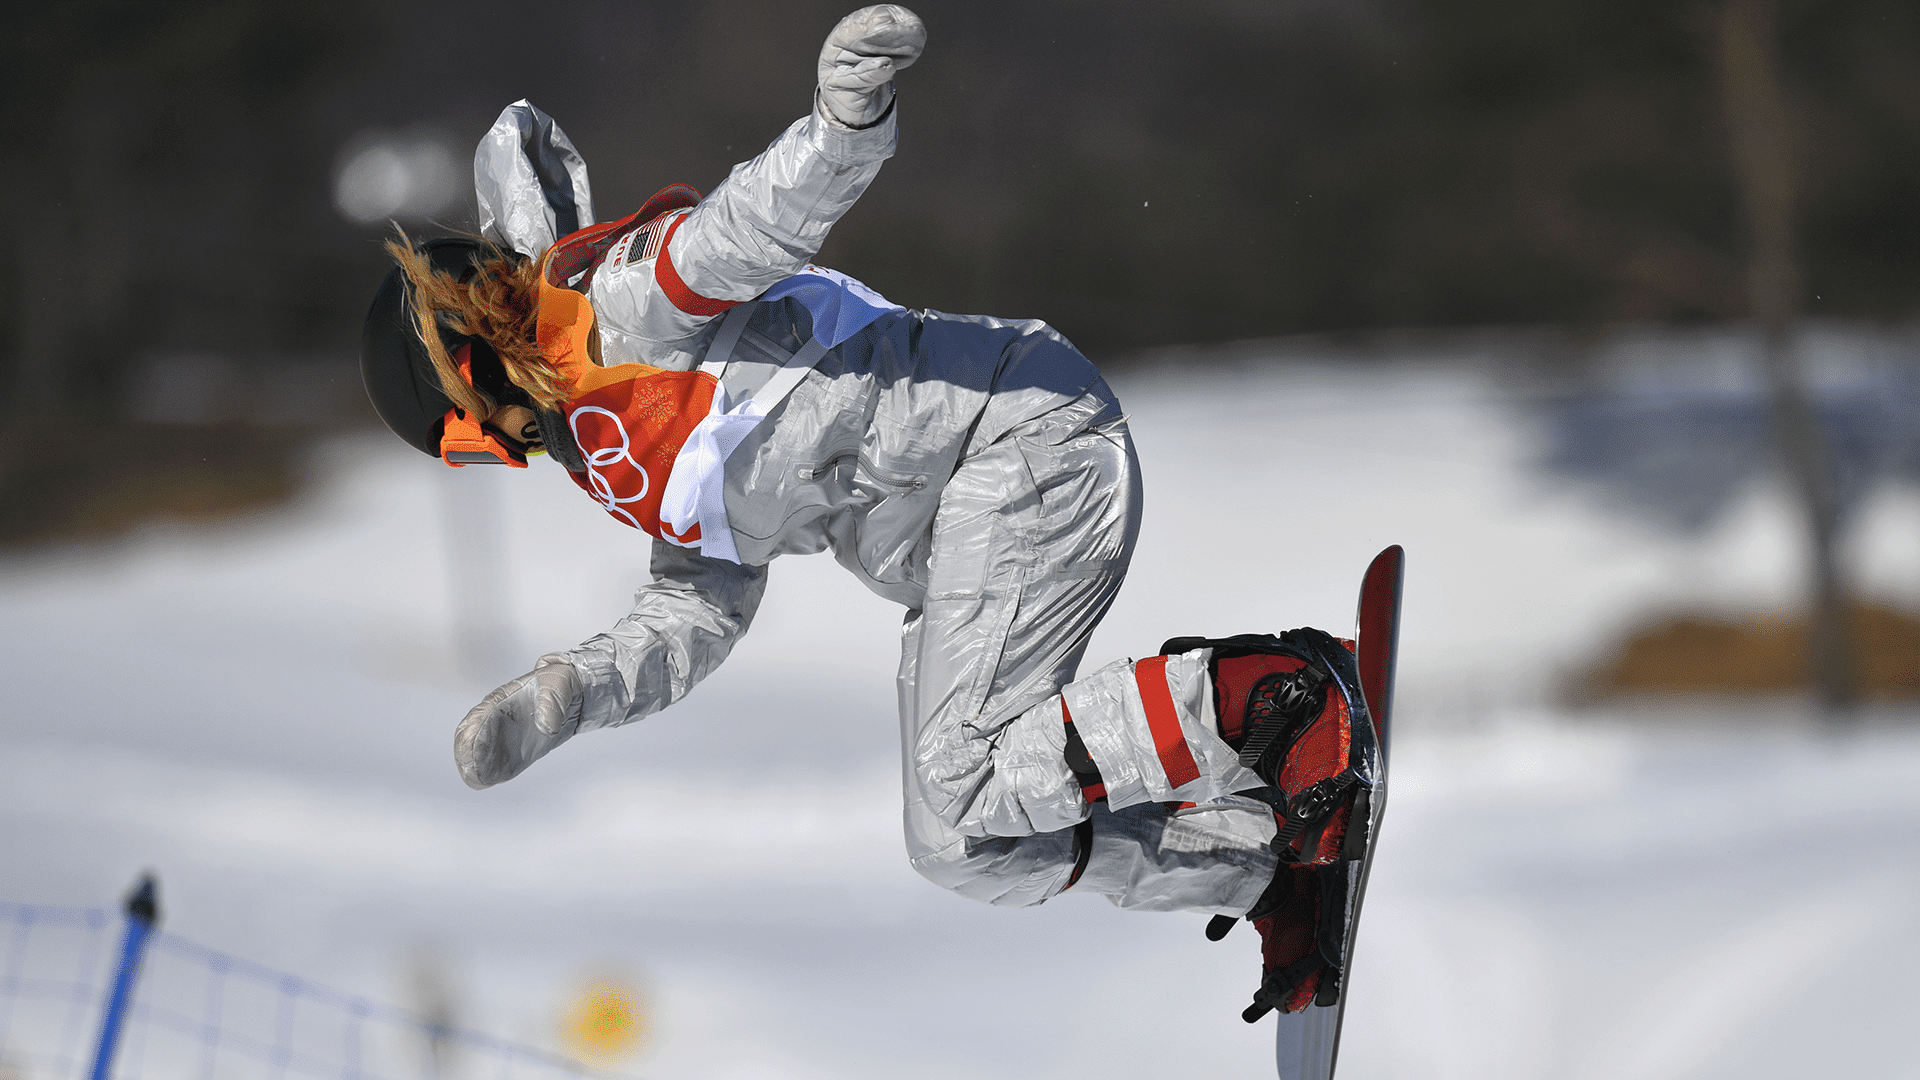 Chloe Kim doing in an aerial trick during a snowboarding competition